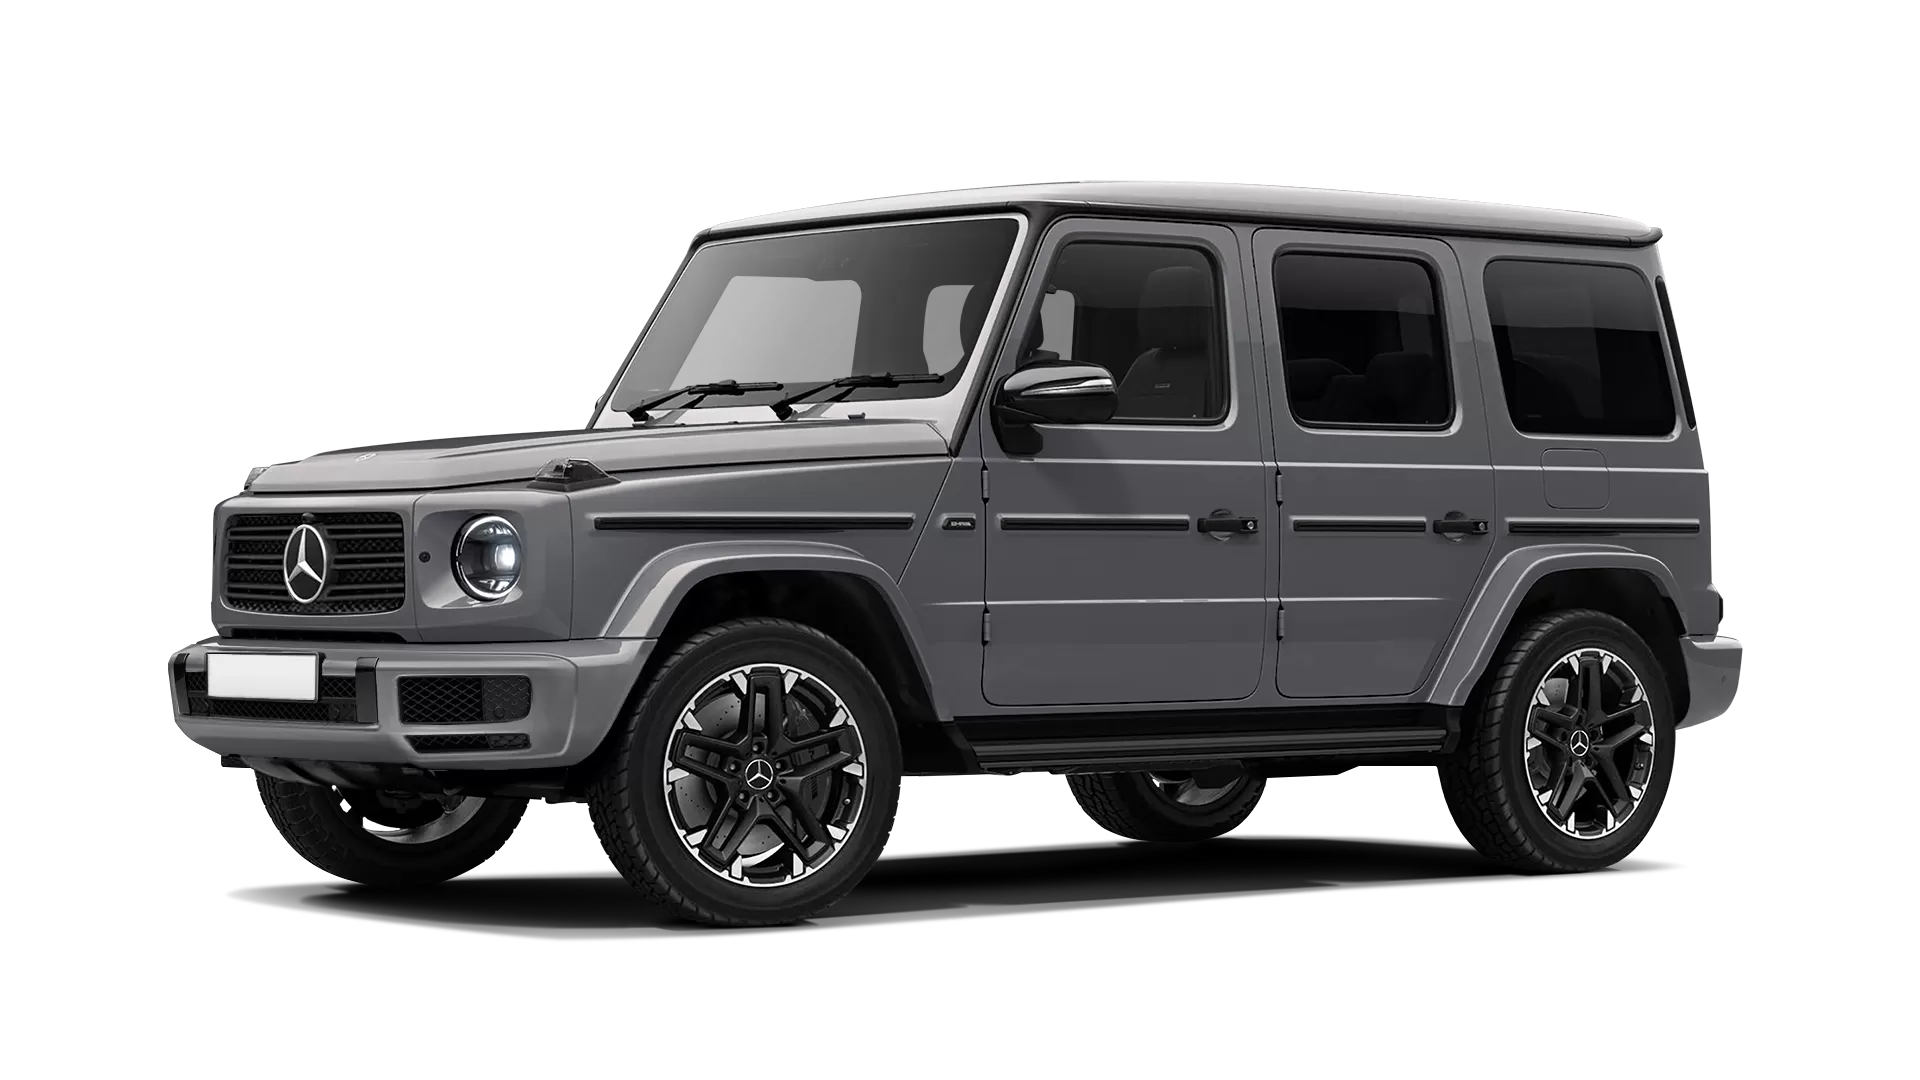 Mercedes G class W463 with carbon body kit: front view shown in Mojave Silver